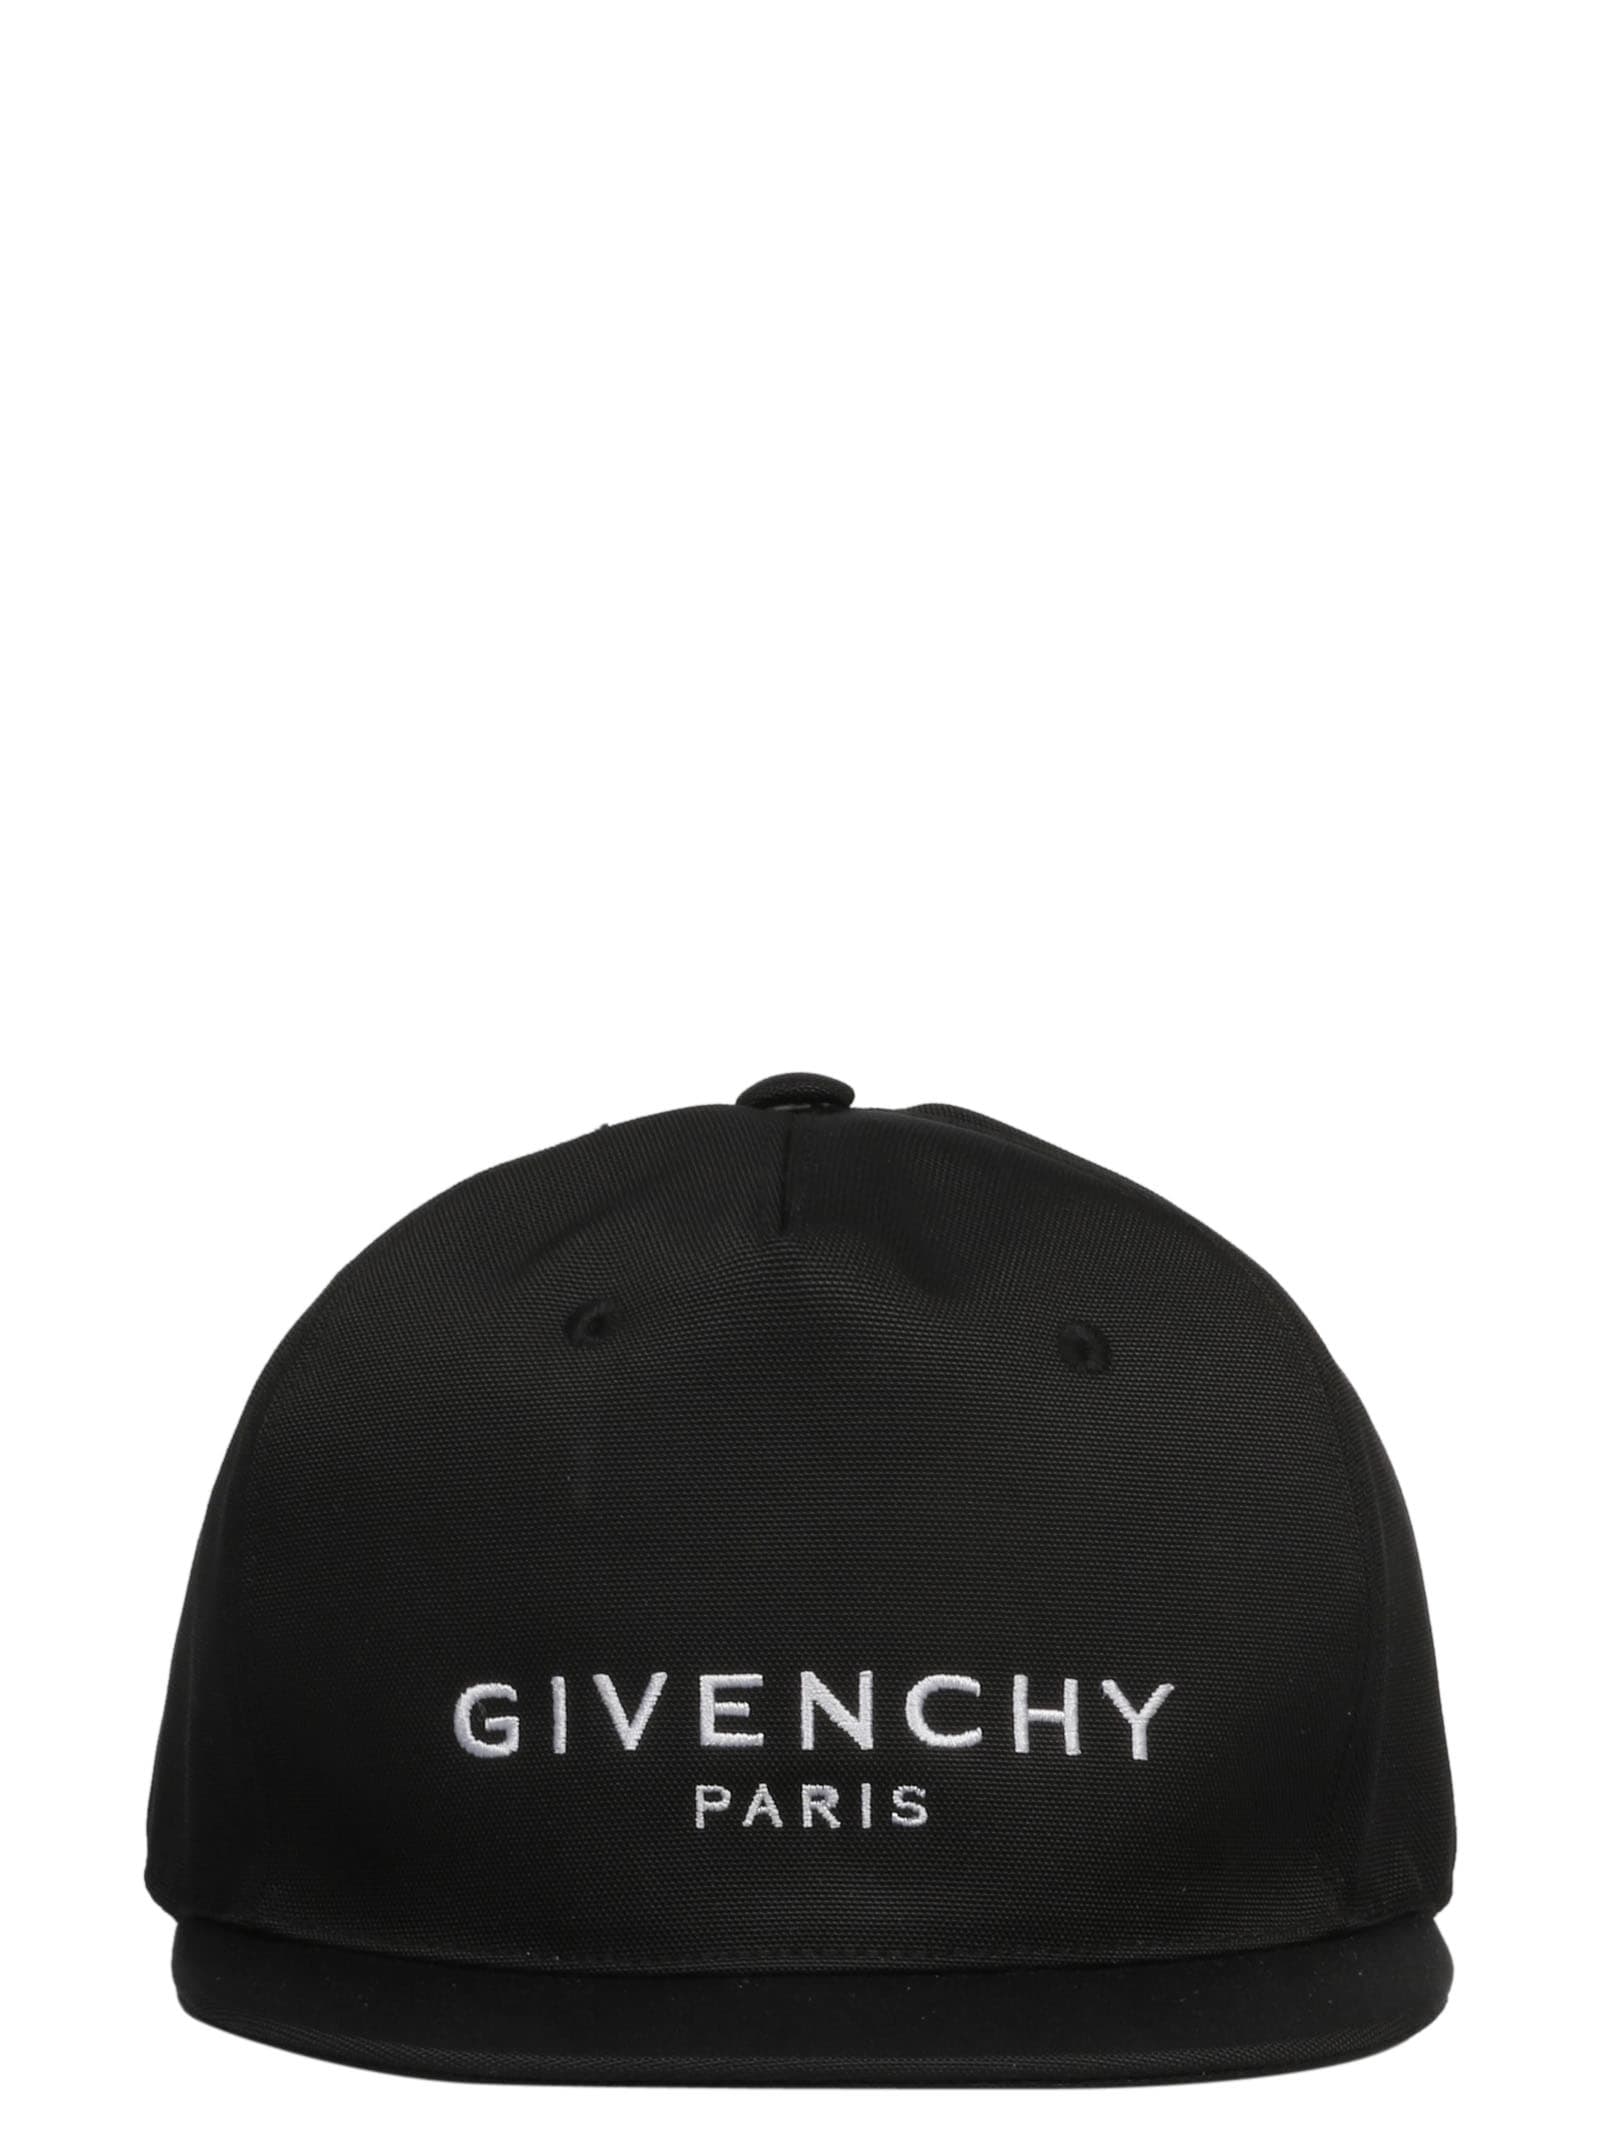 givenchy cap price